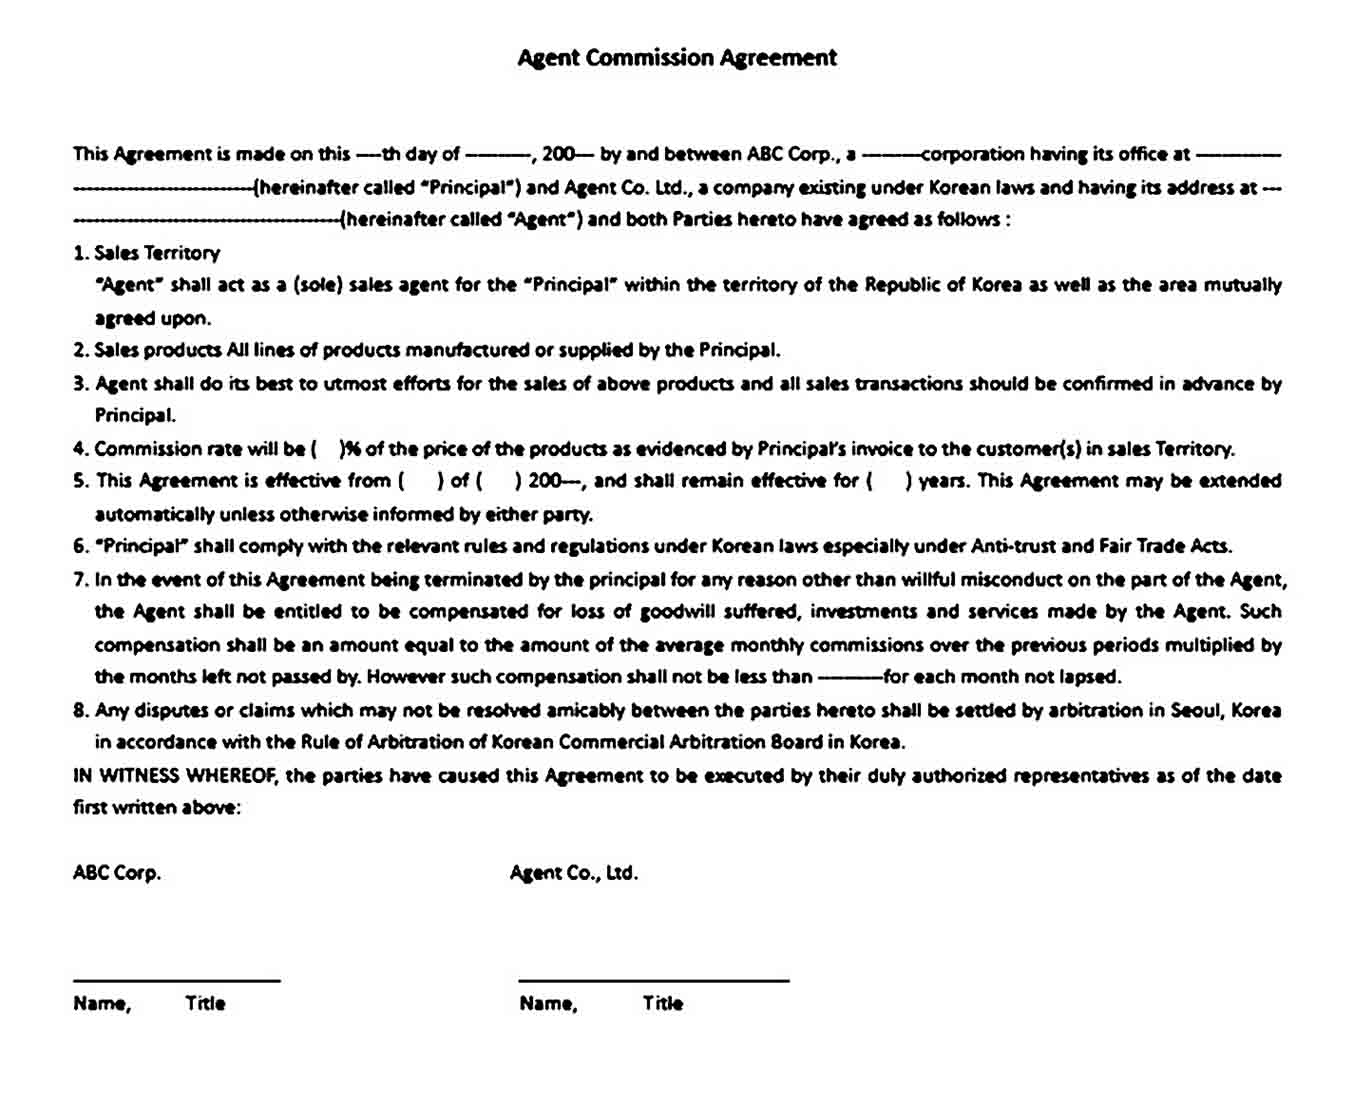 Agent Commission Agreement